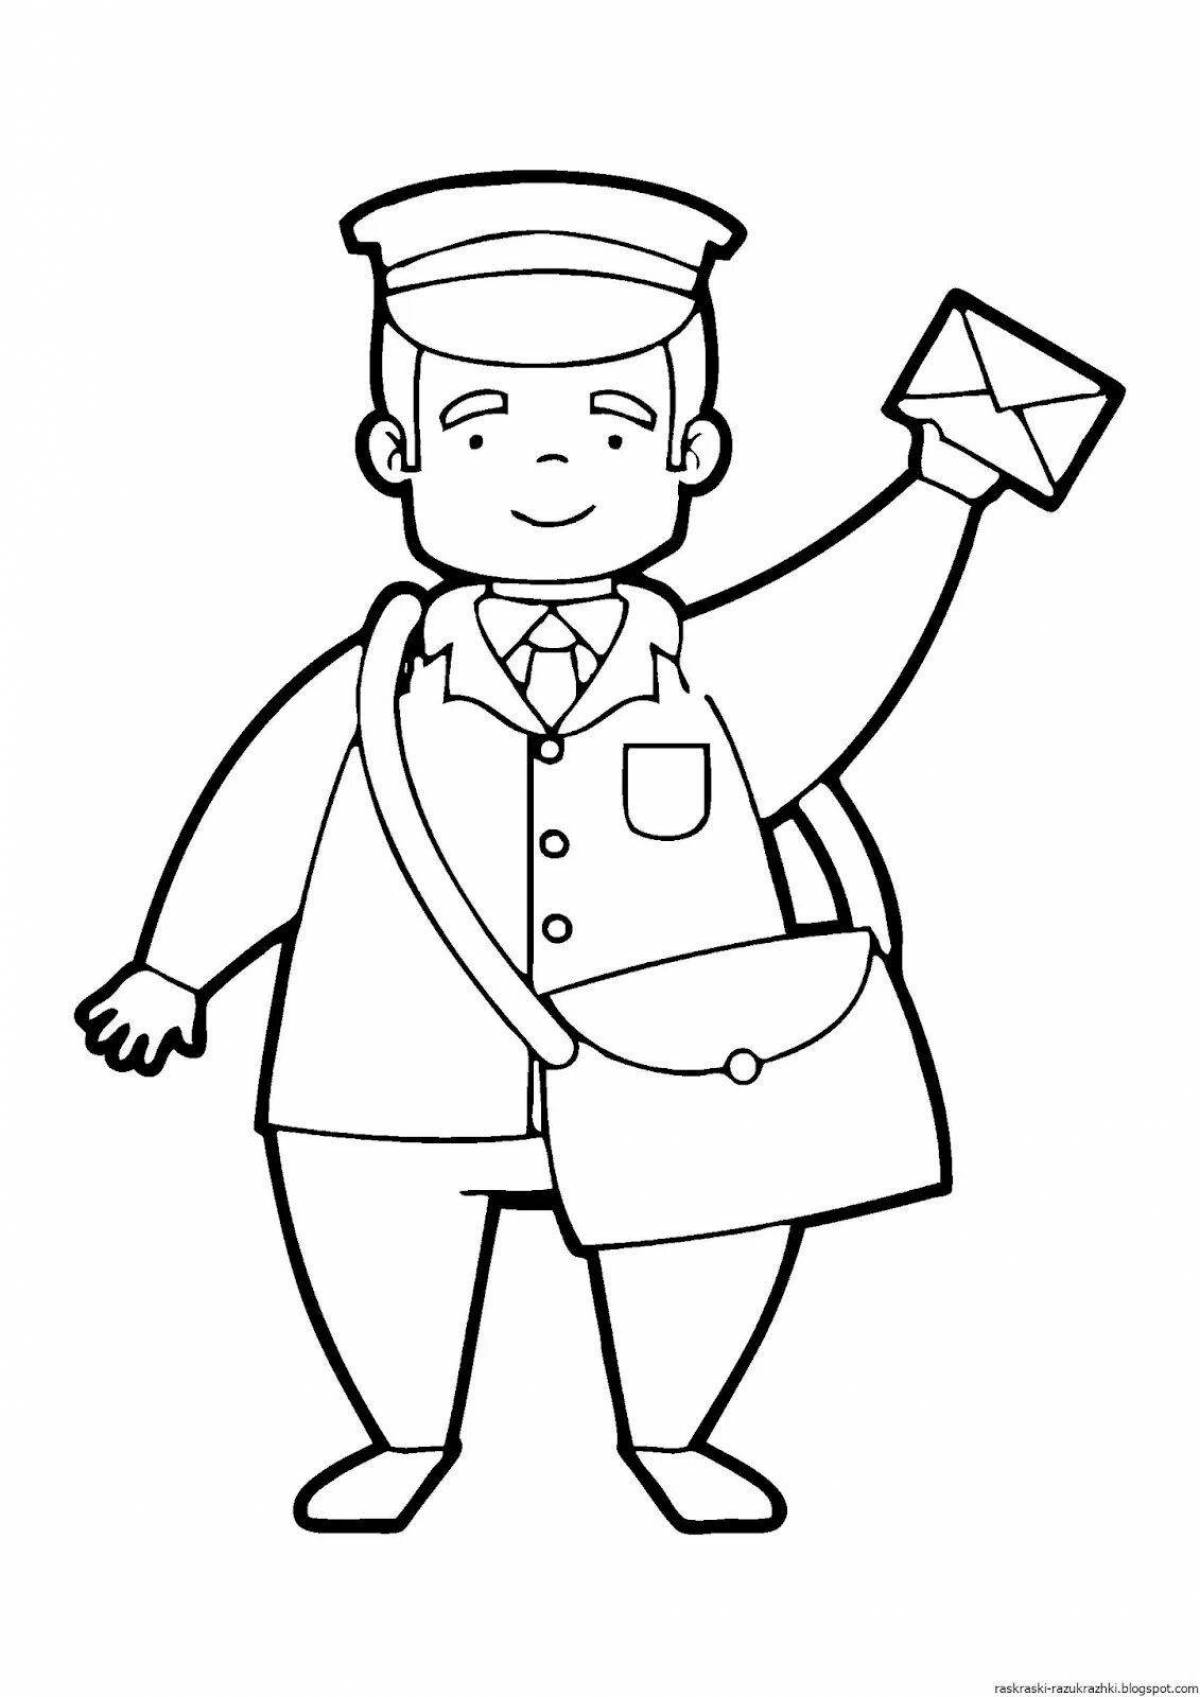 Colorful job coloring pages for schoolchildren